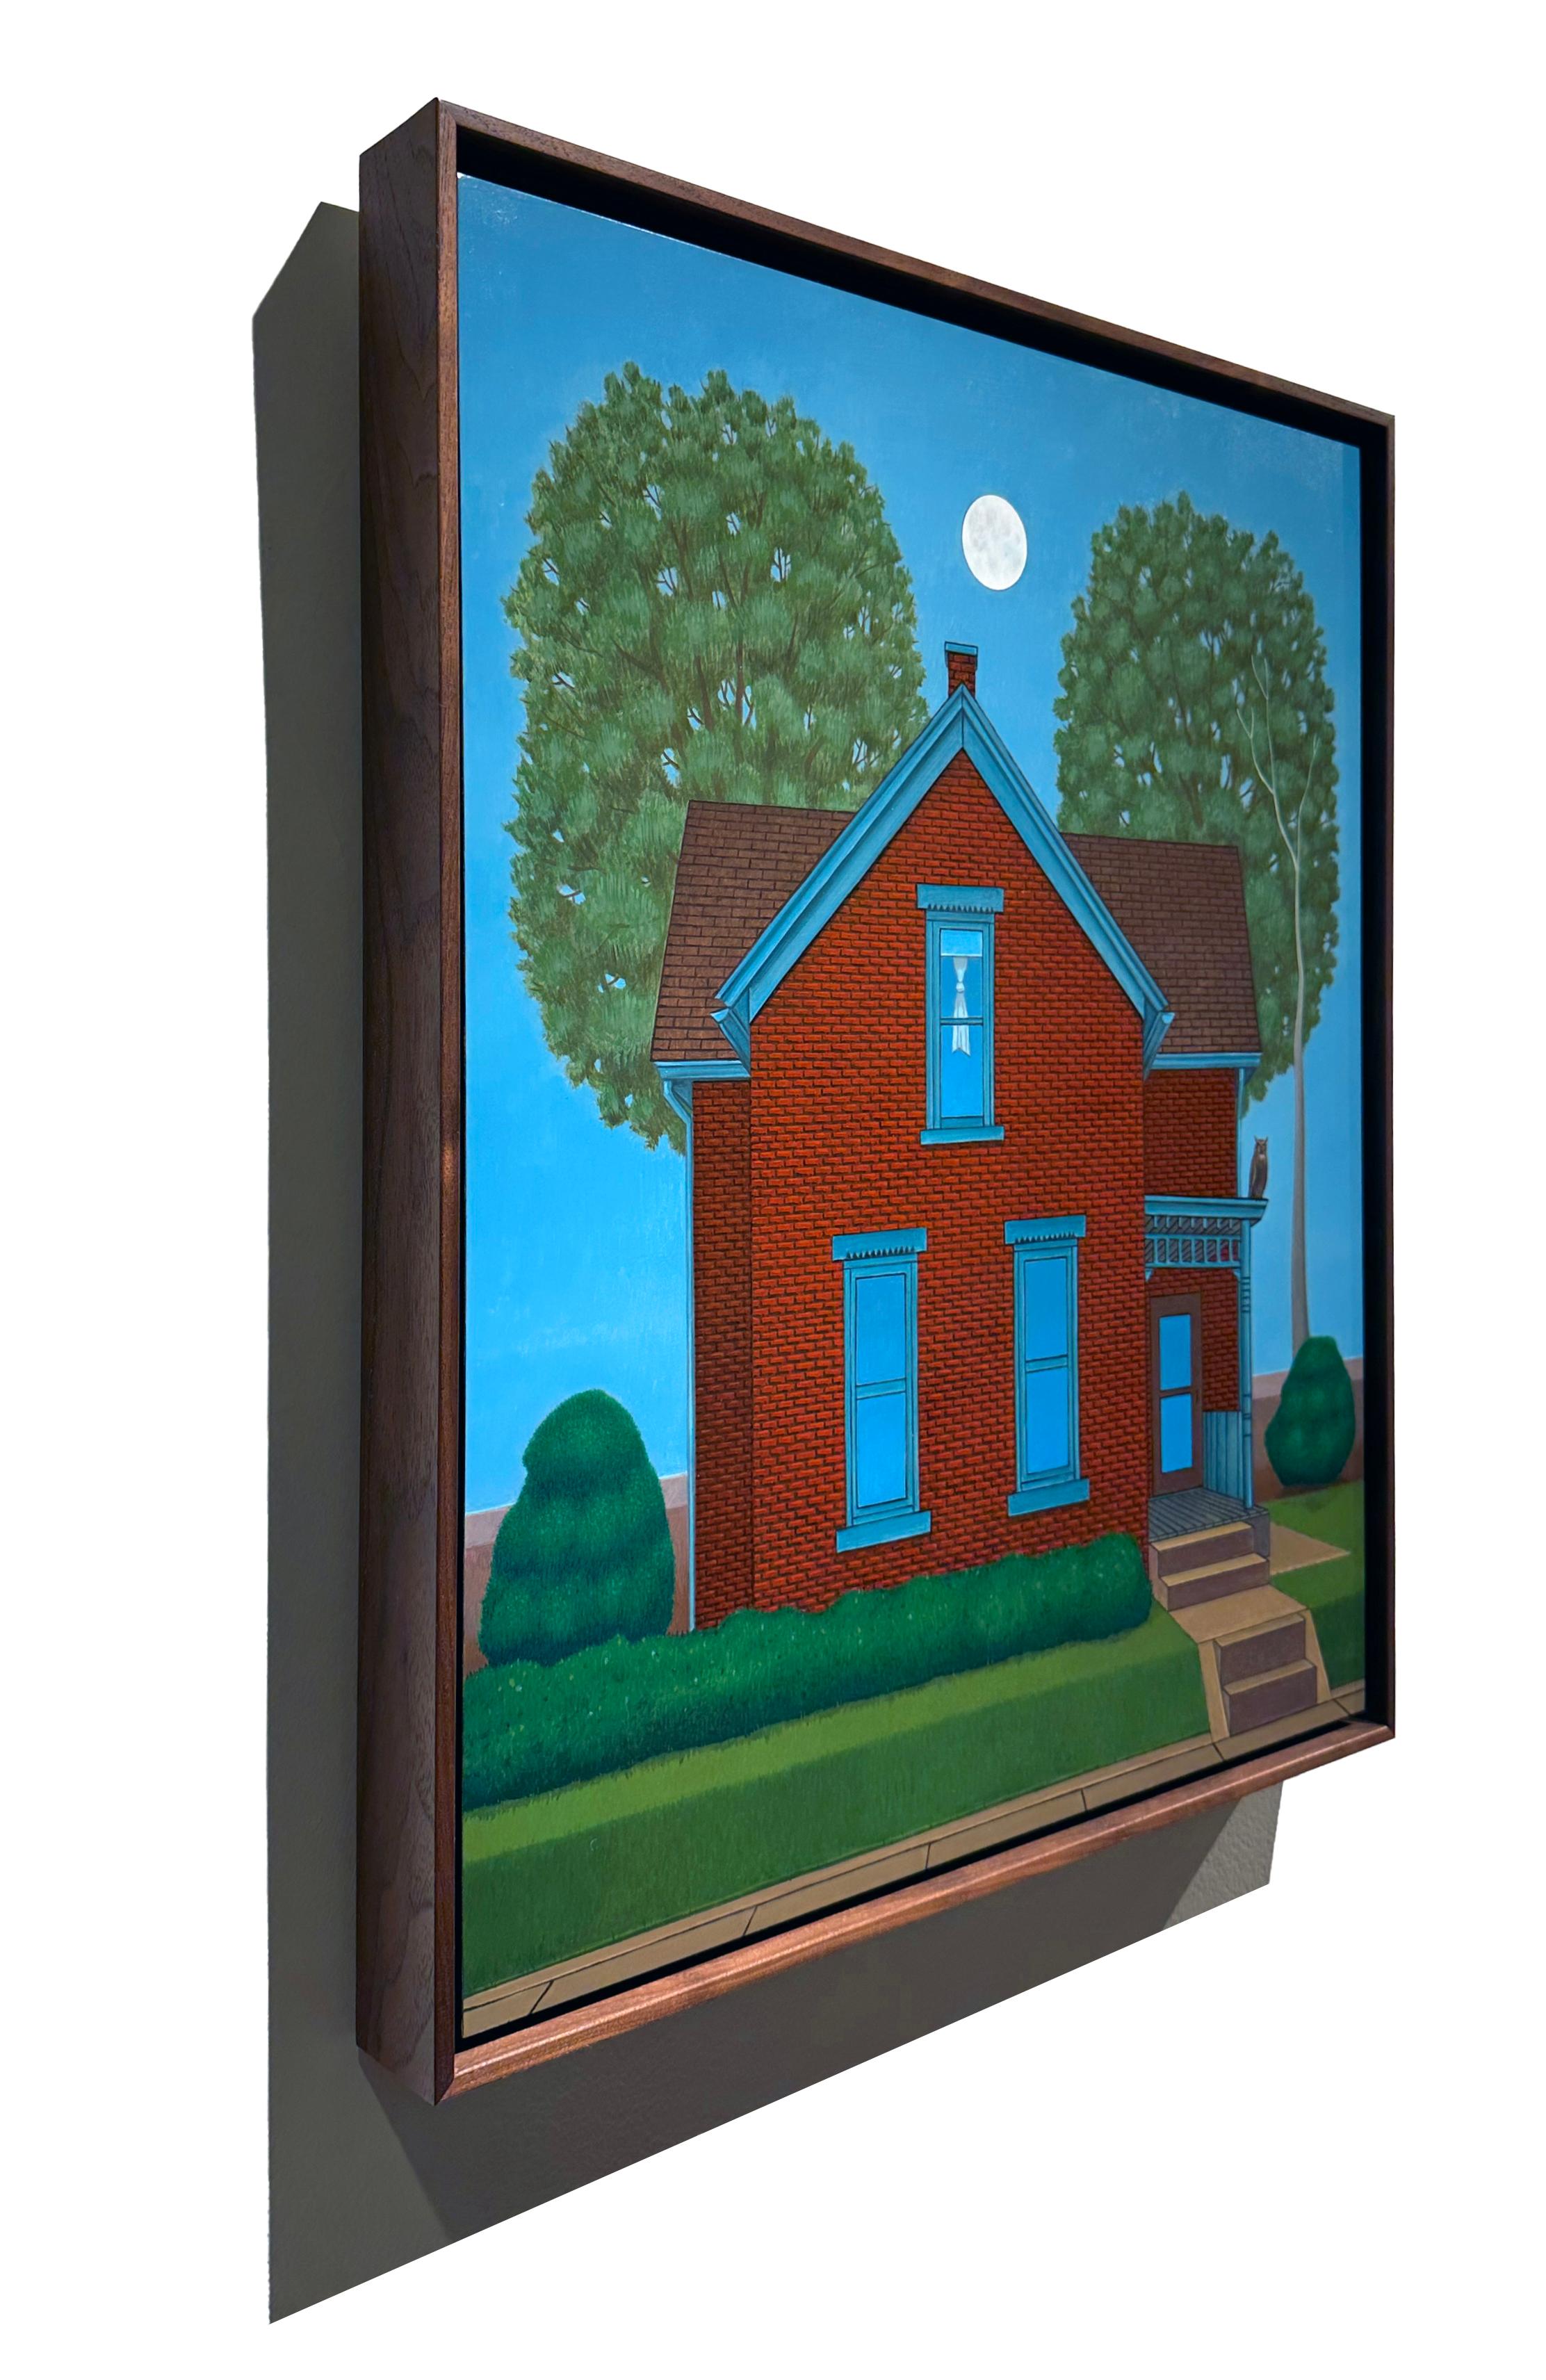 Summer House (For G.A.) - Quaint Cottage Illuminated by Moon Light, Framed - Realist Painting by John Hrehov